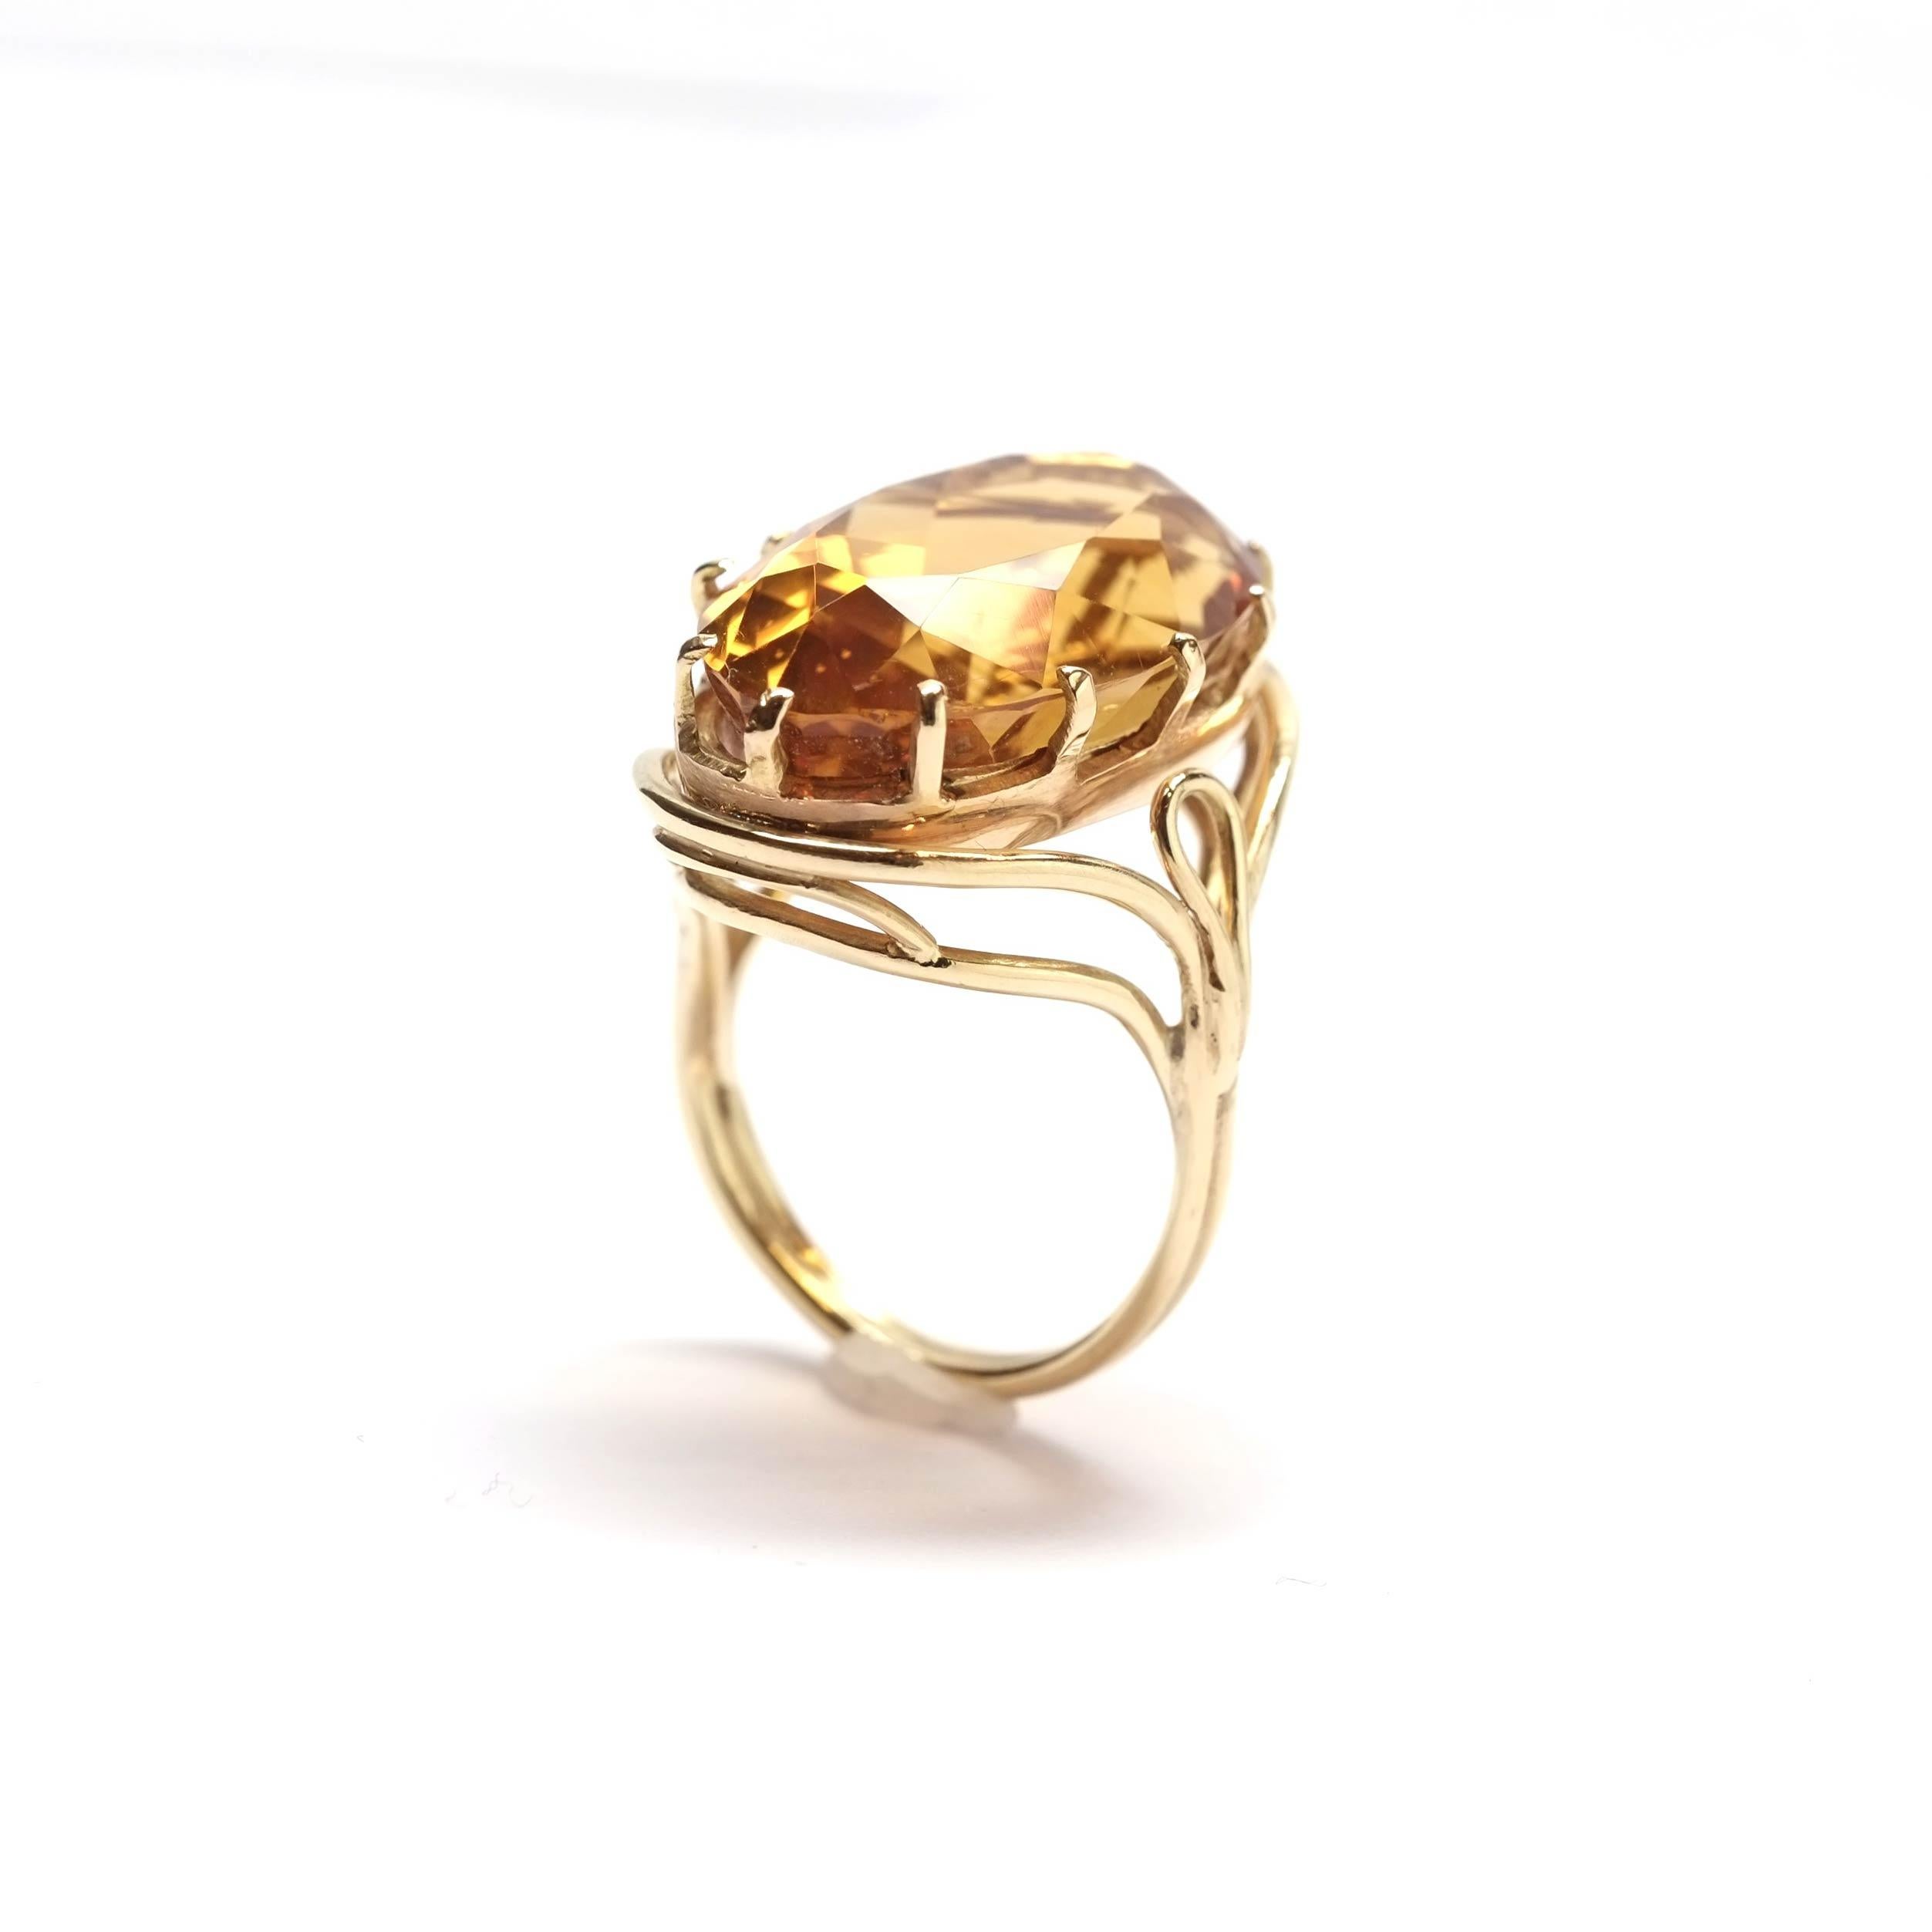 The protagonist of this ring is the citrine quartz. It's oval multifaceted cut exentuates the brightnes and intensity of stone, while the yellow gold settings adds intensity and warmth to the piece.